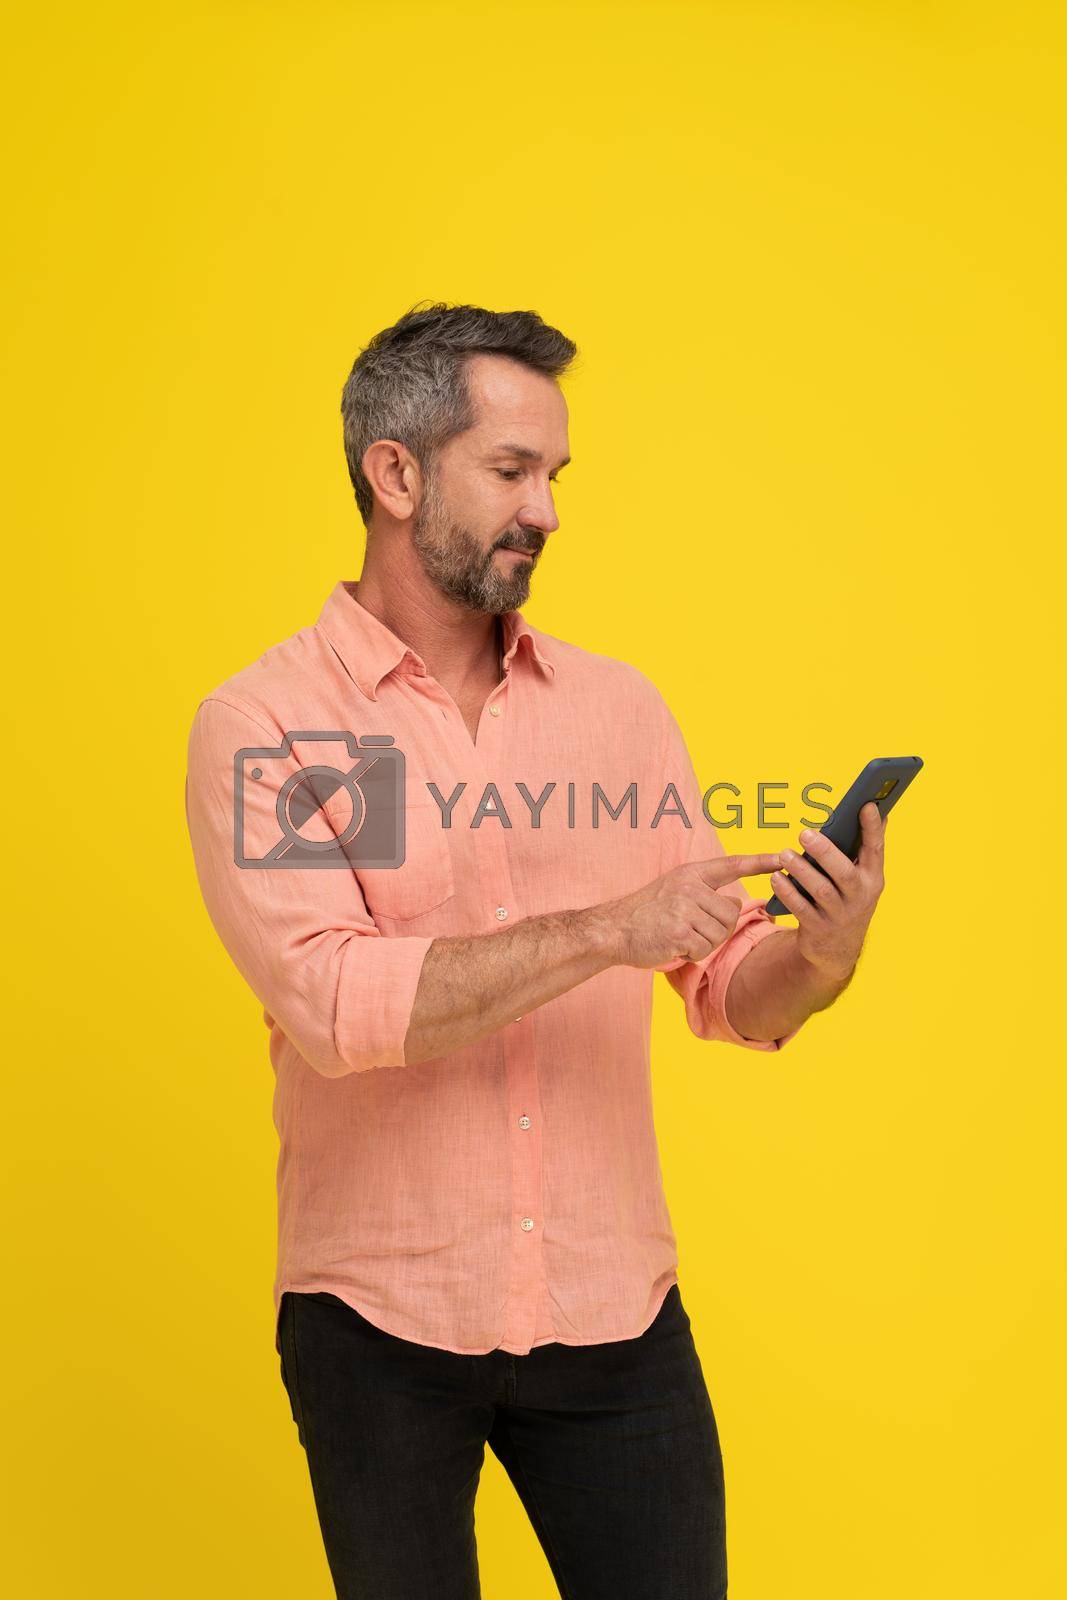 Royalty free image of Masculine, fit middle aged grey haired handsome man holding smartphone looking at it wearing peach shirt isolated on yellow. Mature muscled man with phone, mobile app advertisement by LipikStockMedia